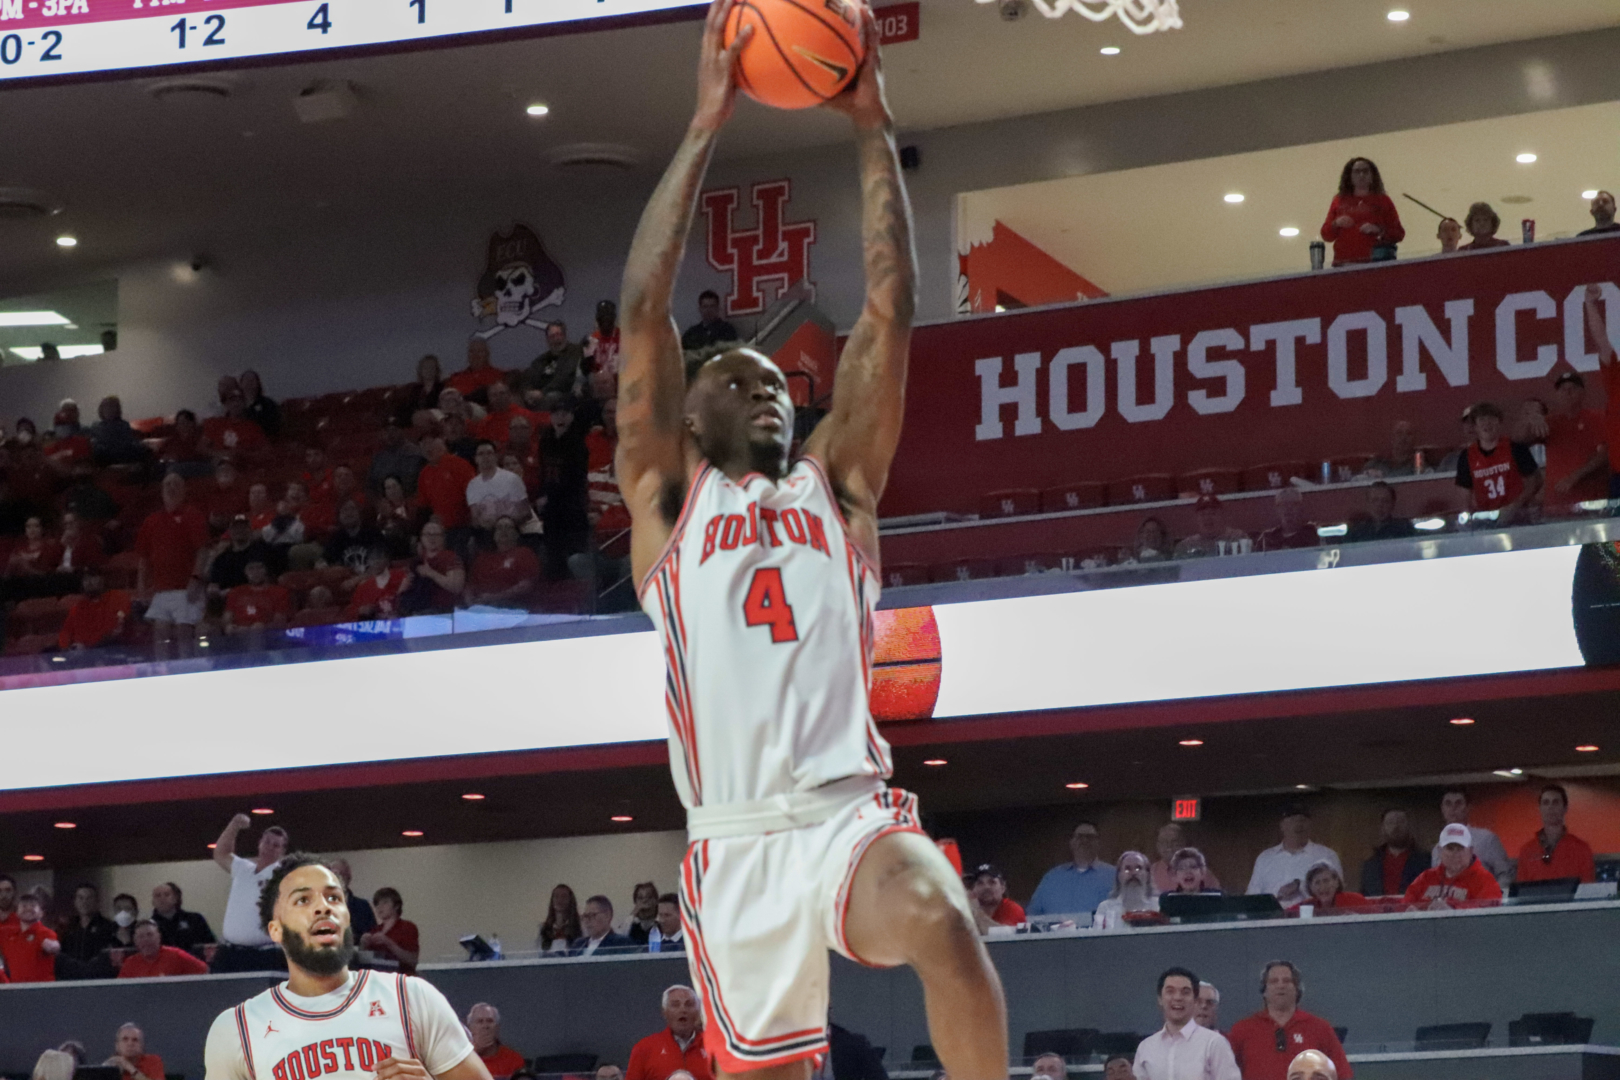 Senior guard Taze Moore takes flight for a two-handed slam during the first half of UH basketball's win over Temple on Thursday night at Fertitta Center. | Armando Yanez/The Cougar